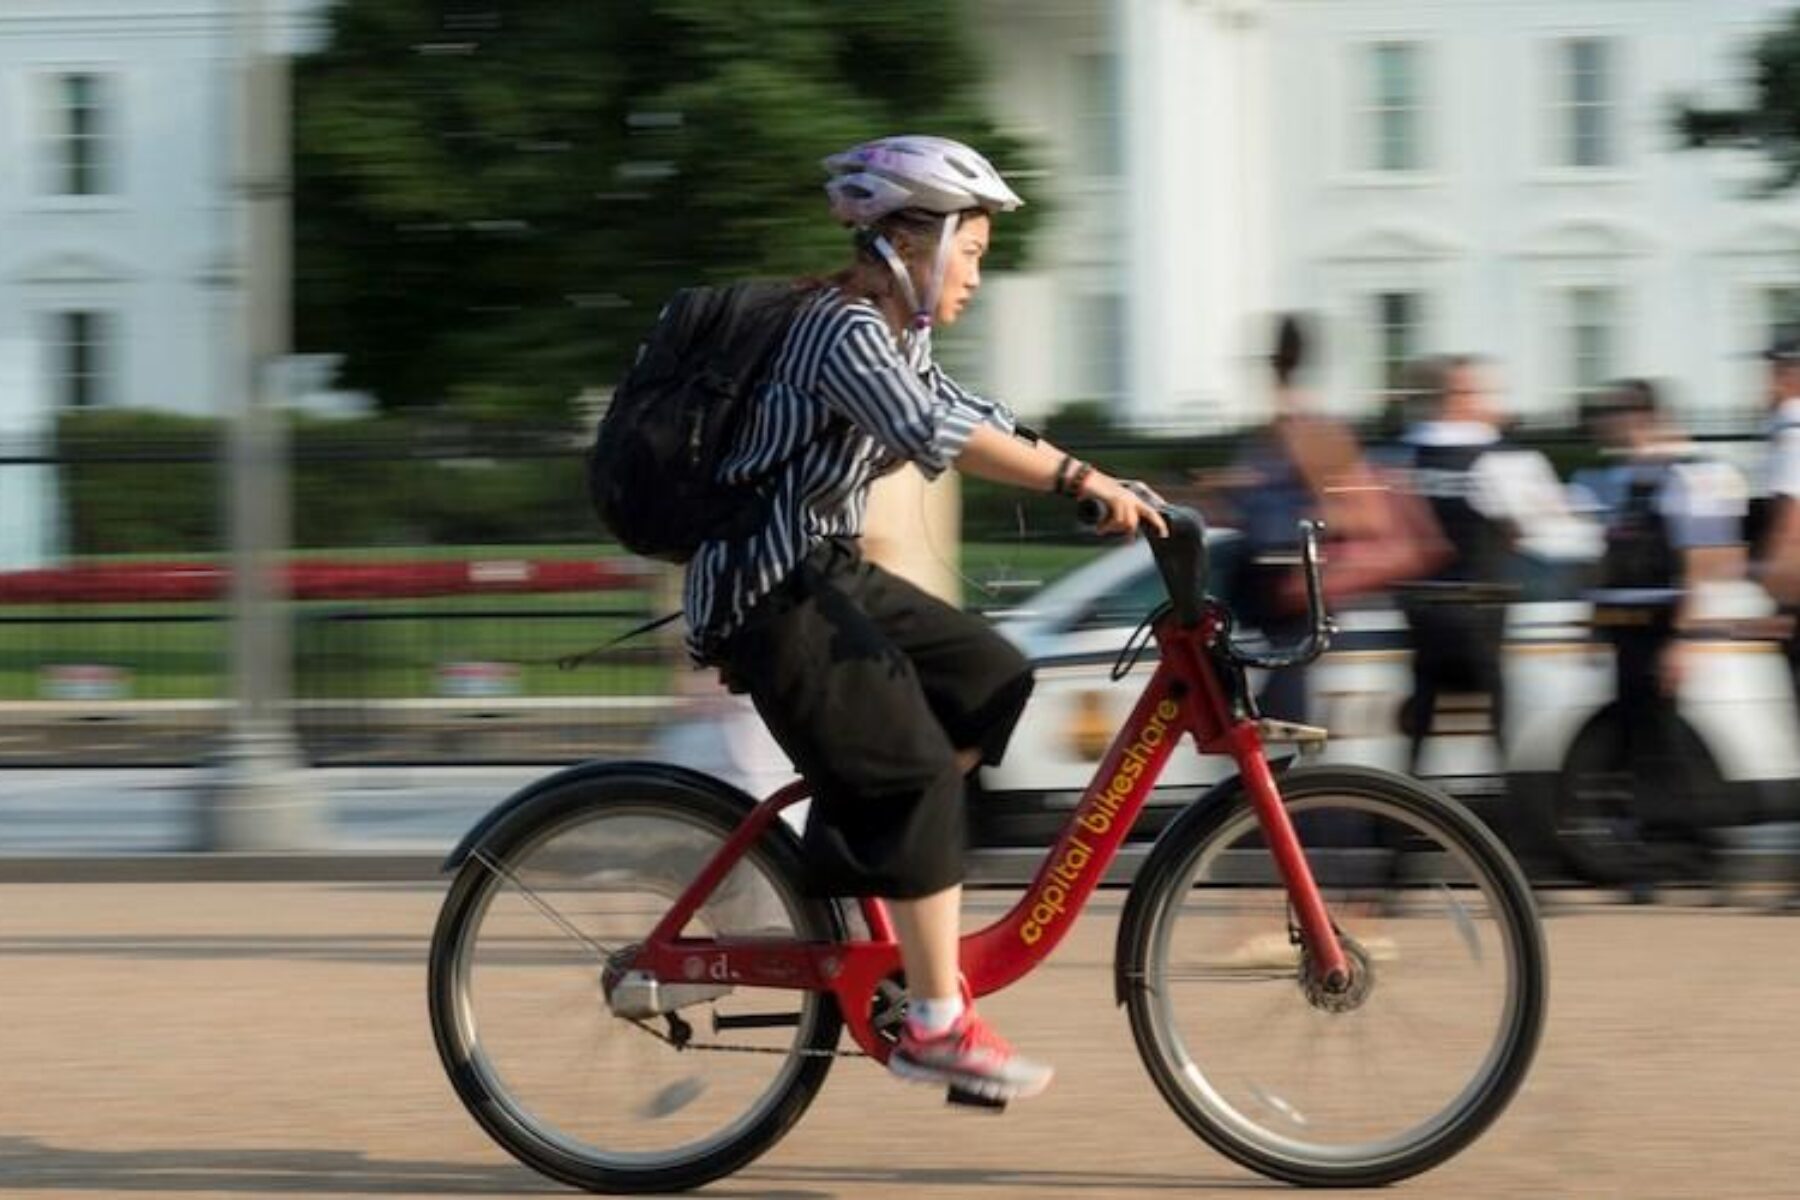 Bicyclist in front of the White House | Photo courtesy Getty Images